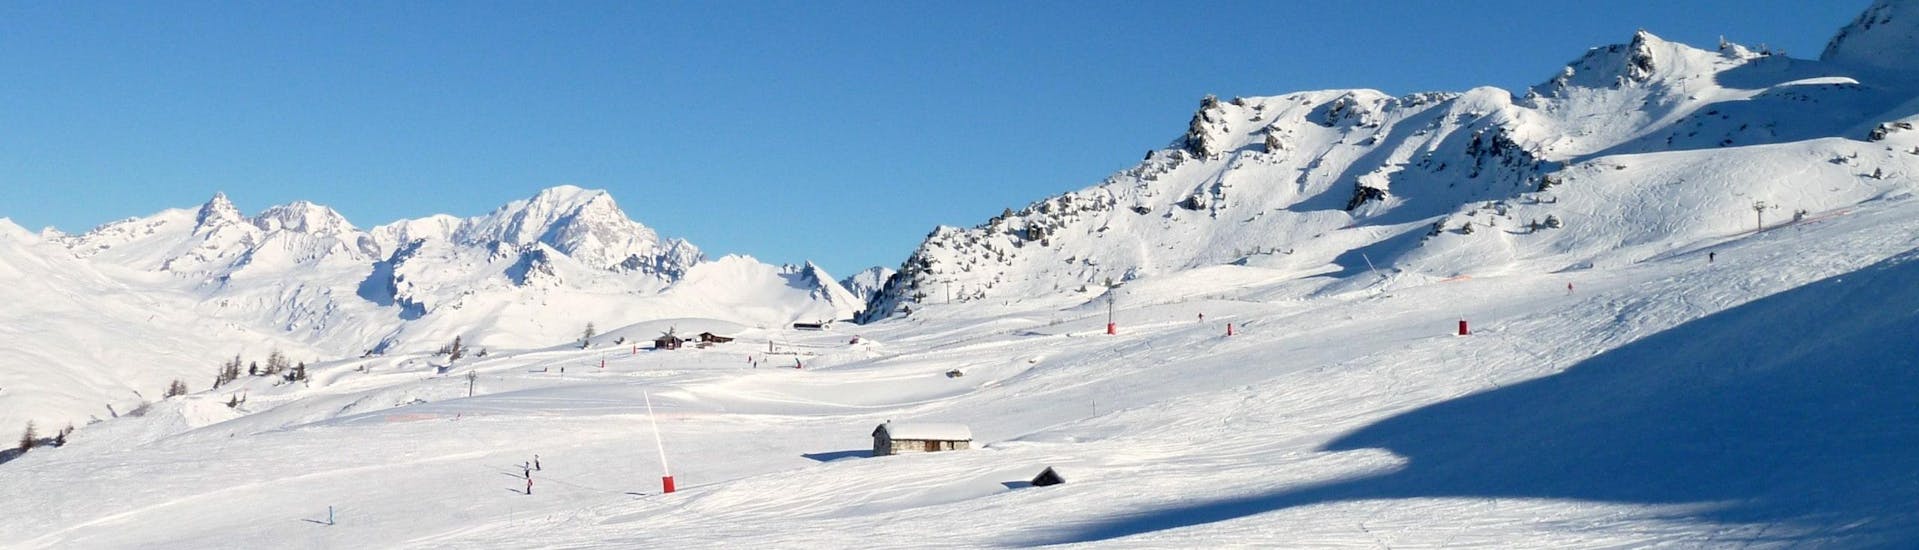 View over the sunny mountain landscape of Arc 1600 where local ski schools offer their ski lessons.